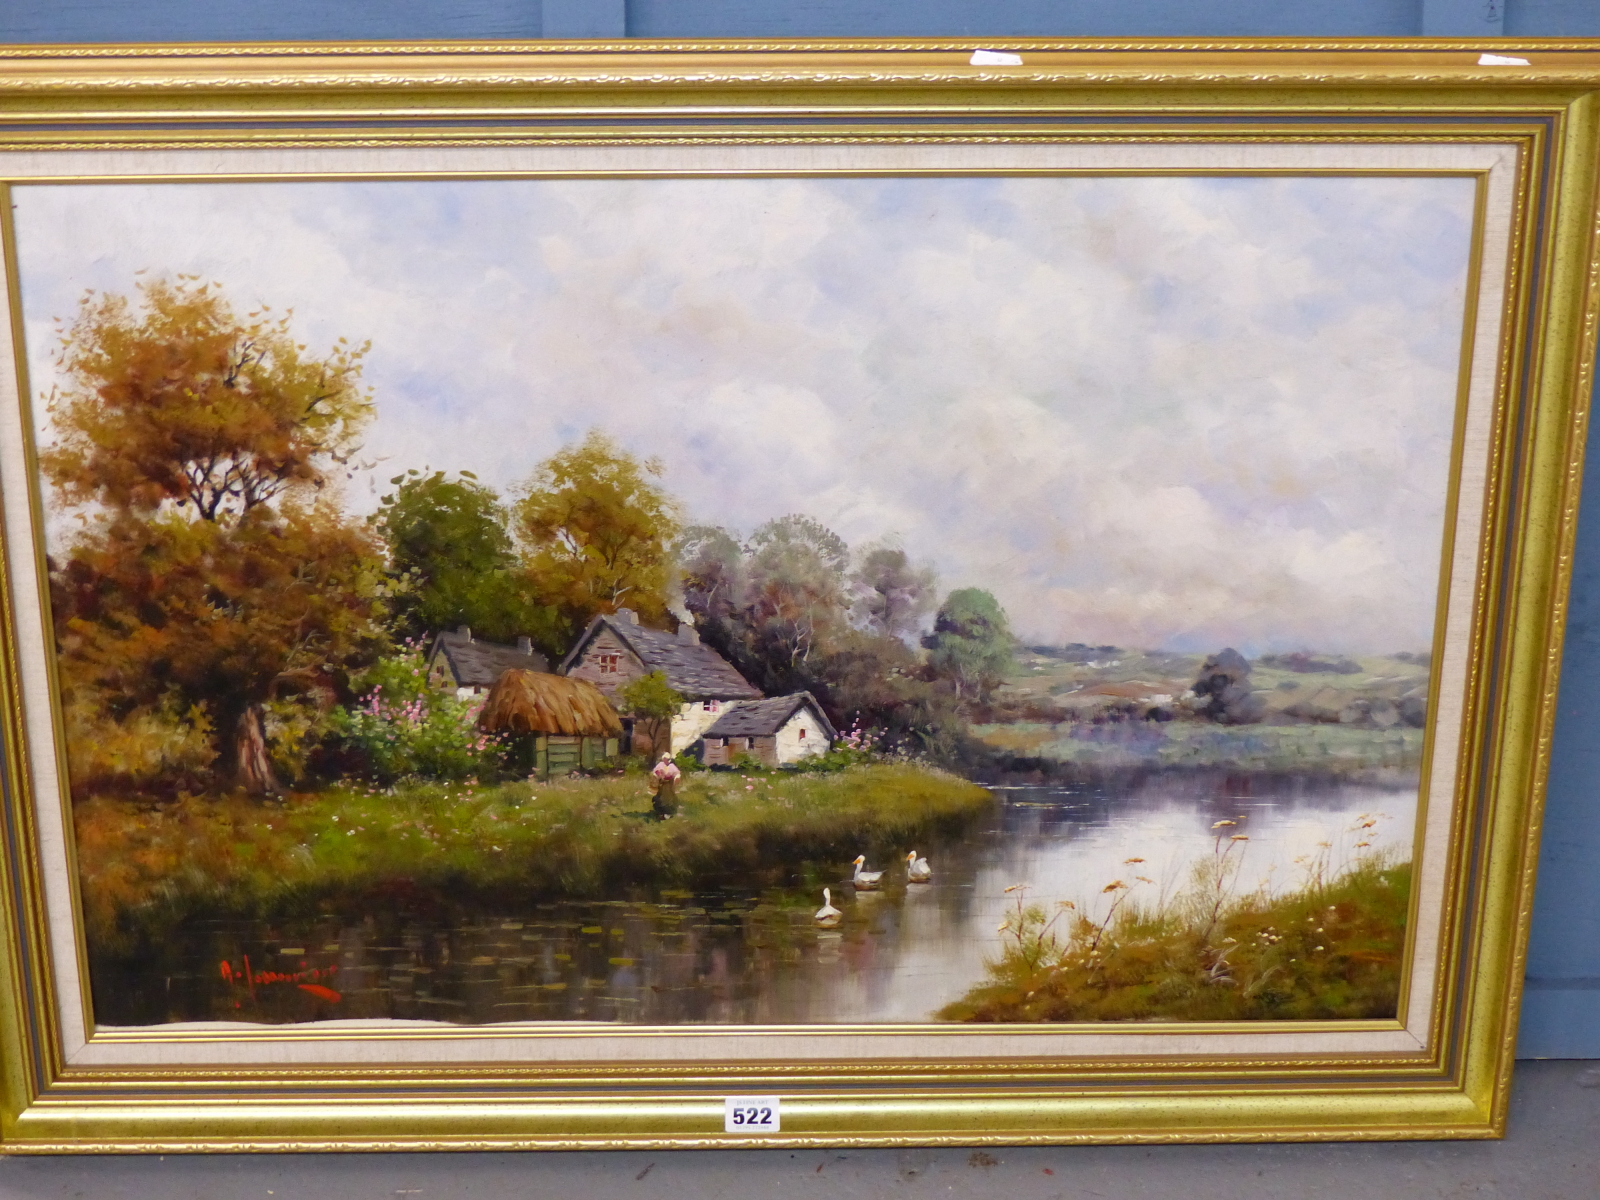 ITALIAN SCHOOL (20TH CENTURY), WOMAN FEEDING DUCKS IN A RIVER LANDSCAPE, INDISTINCTLY SIGNED, OIL ON - Image 2 of 5